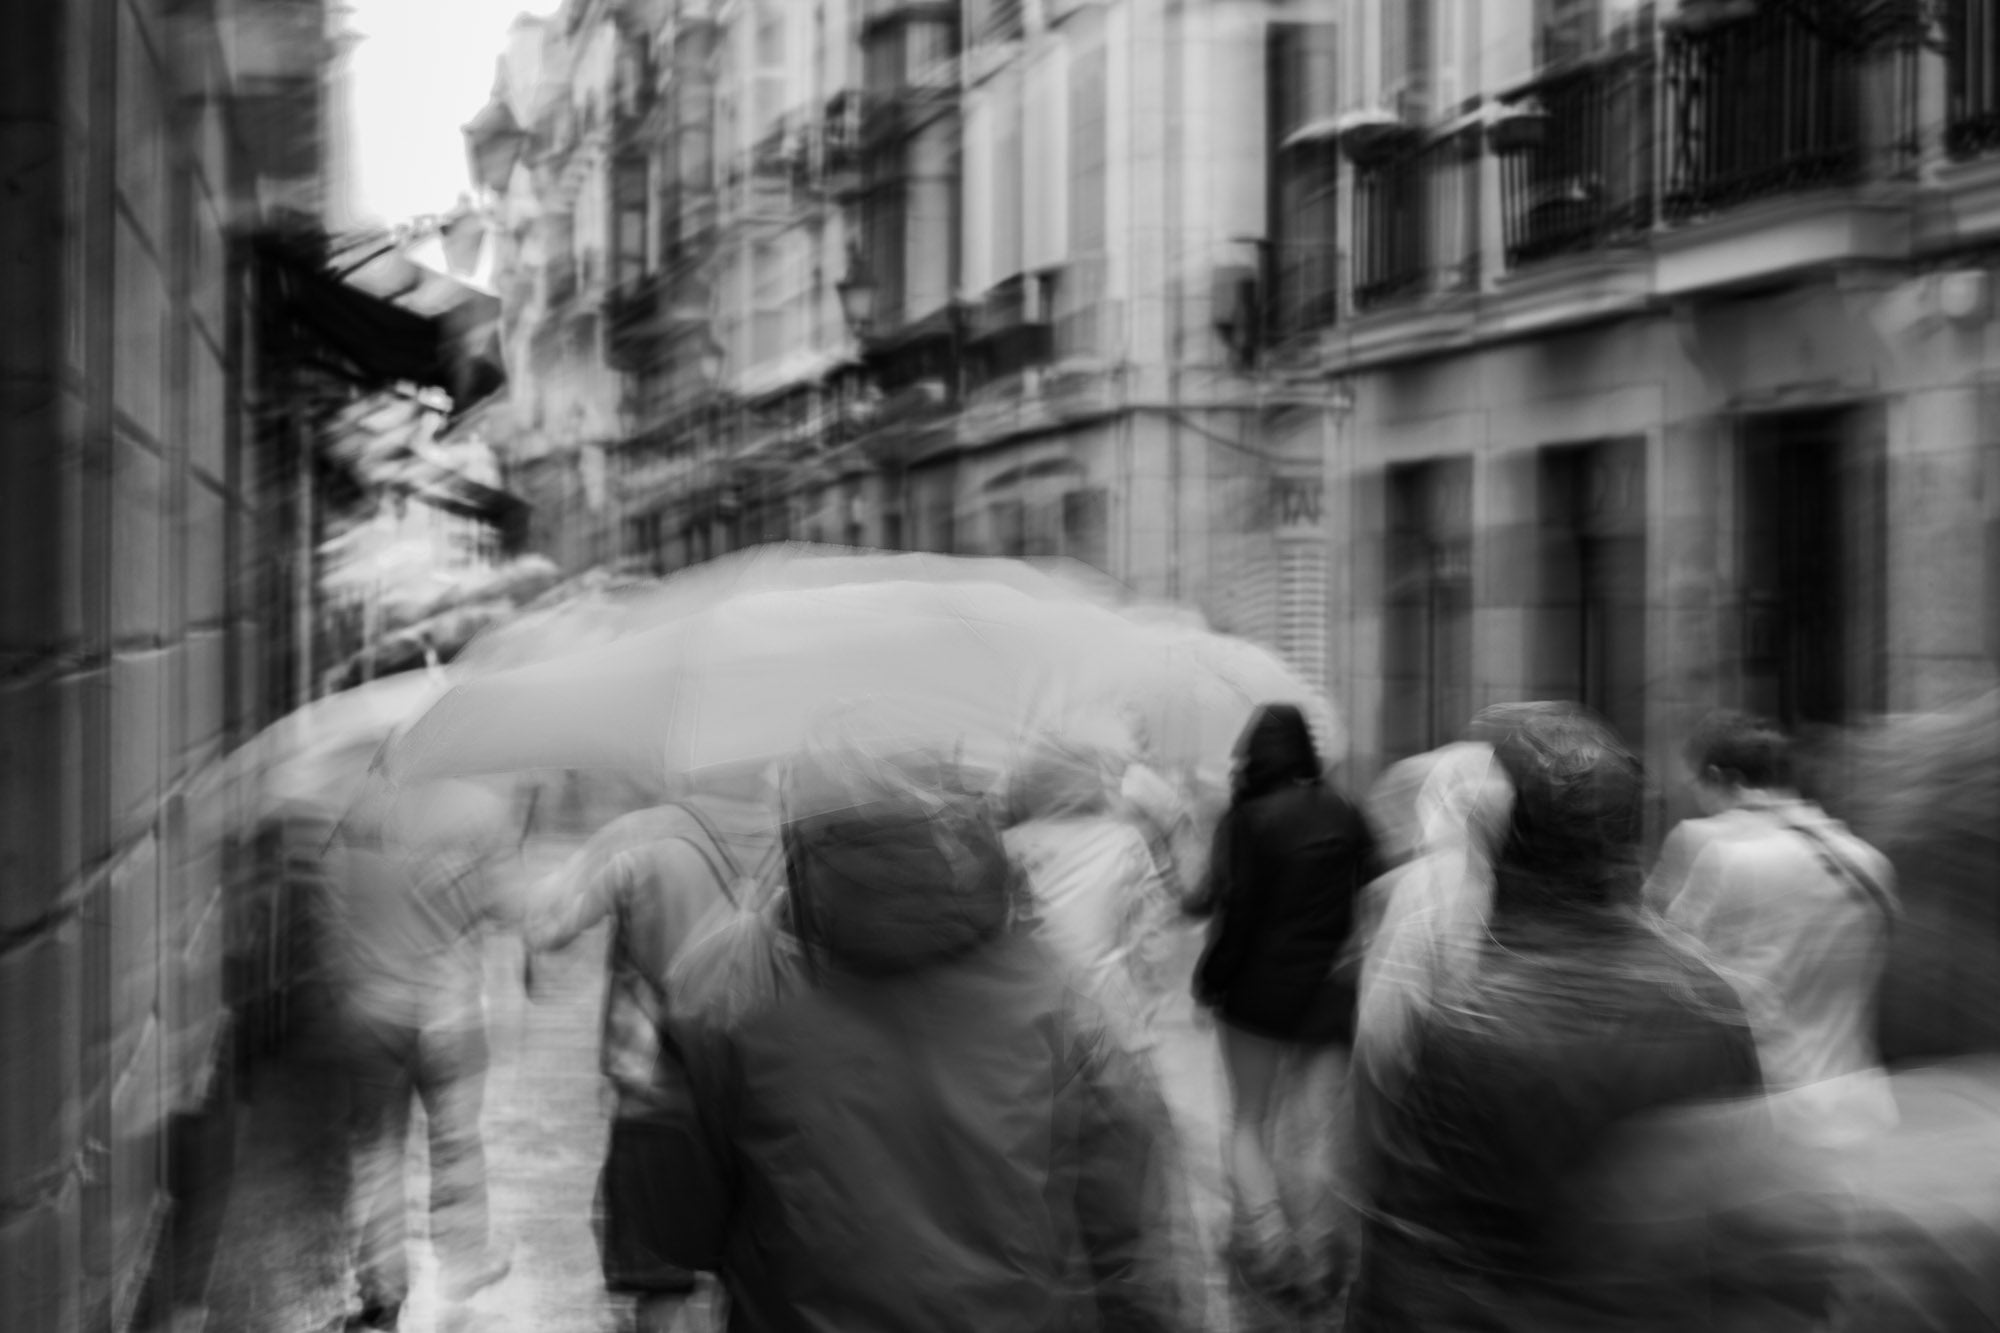 A monochrome image of pedestrians with umbrellas blurred by motion, embodying rain's lullaby in San Sebastian, inspired by Langston Hughes’ poetry.